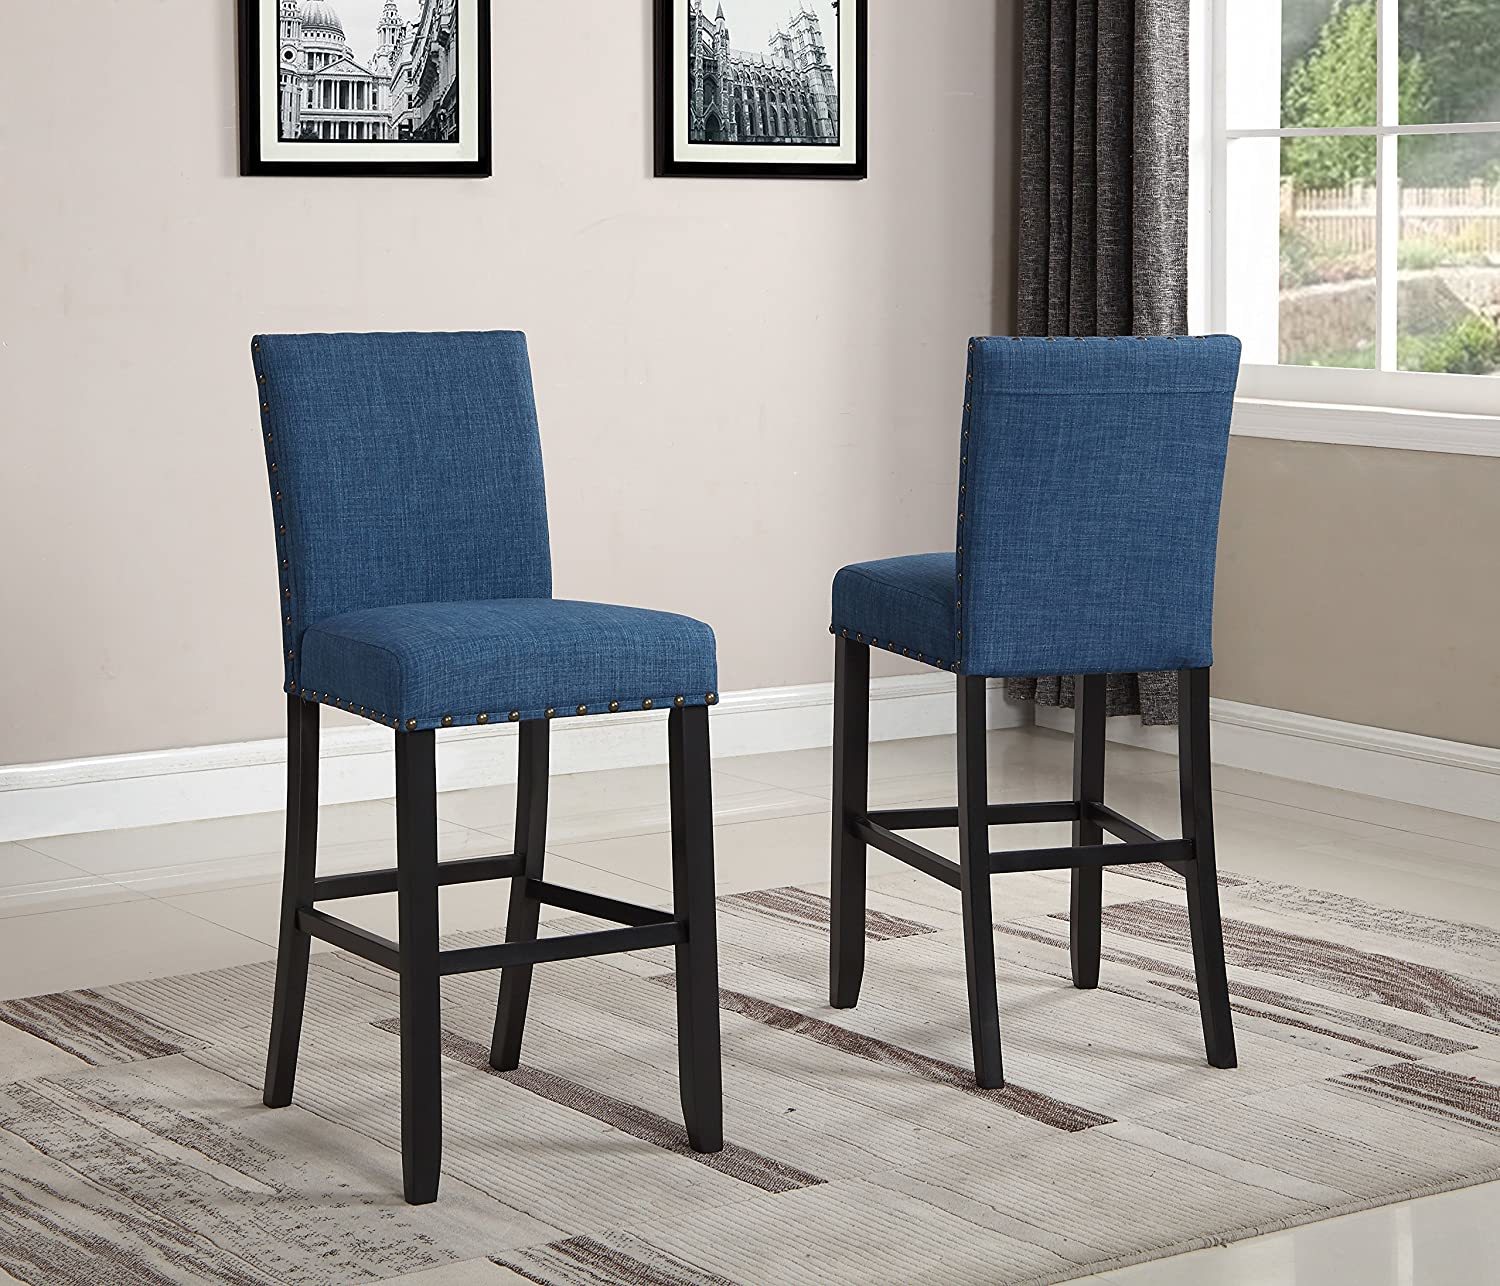 Roundhill Furniture Biony Fabric Bar Stools With Nailhead Trim (Set Of 2), Blue - $195.99